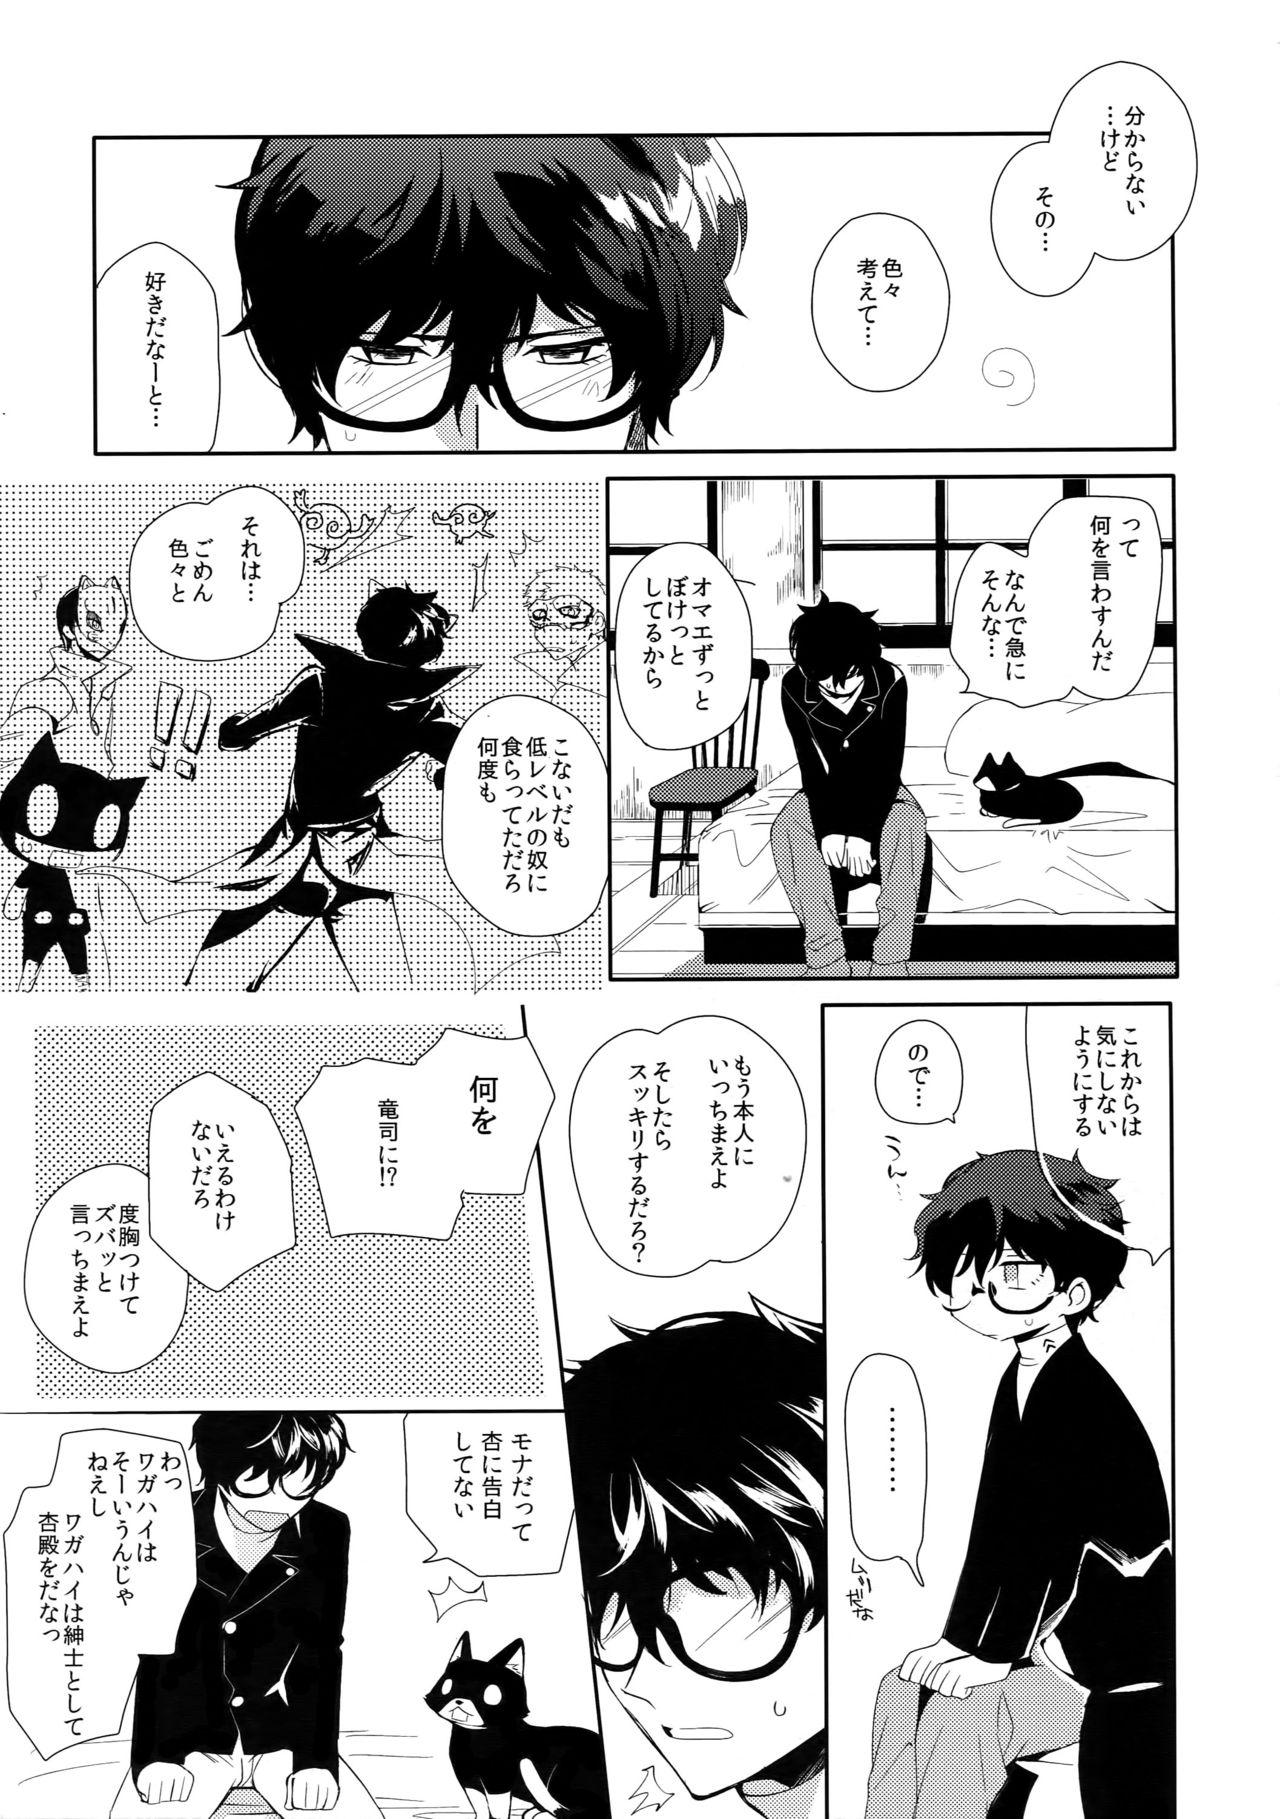 Kiss You're My Hero - Persona 5 Groupsex - Page 6